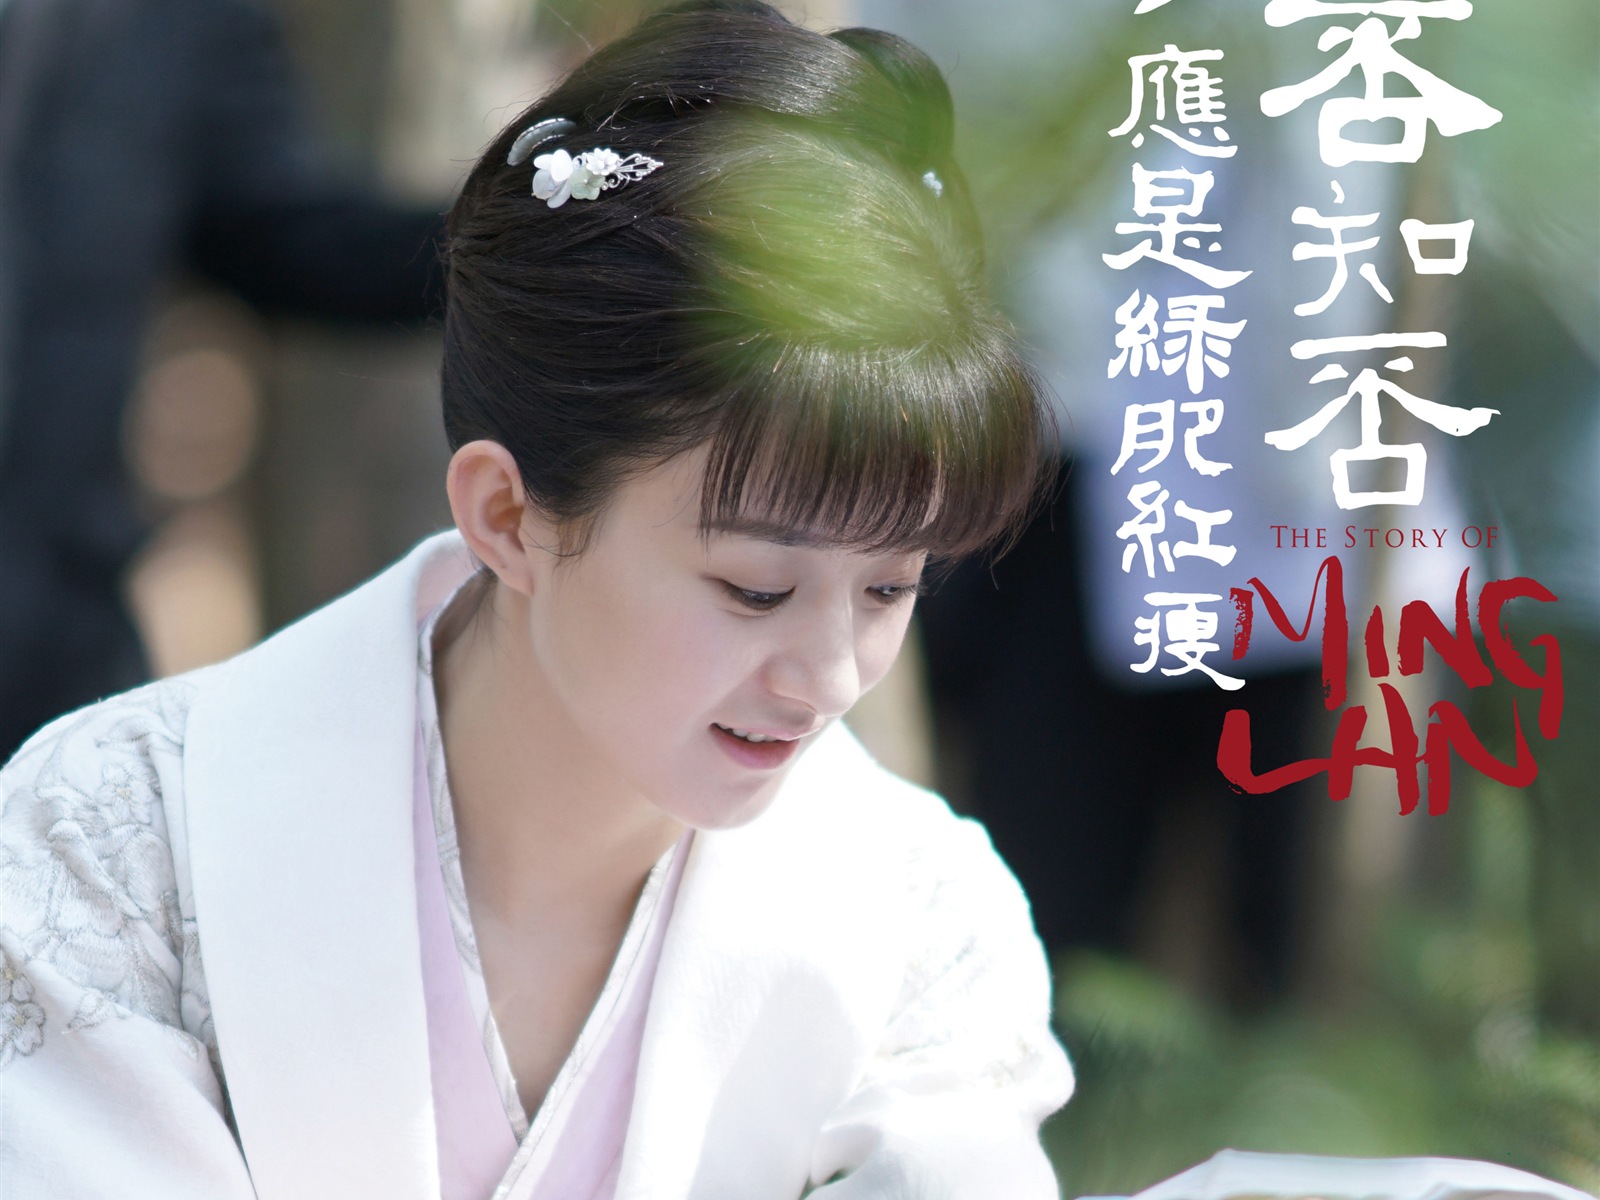 The Story Of MingLan, TV series HD wallpapers #27 - 1600x1200